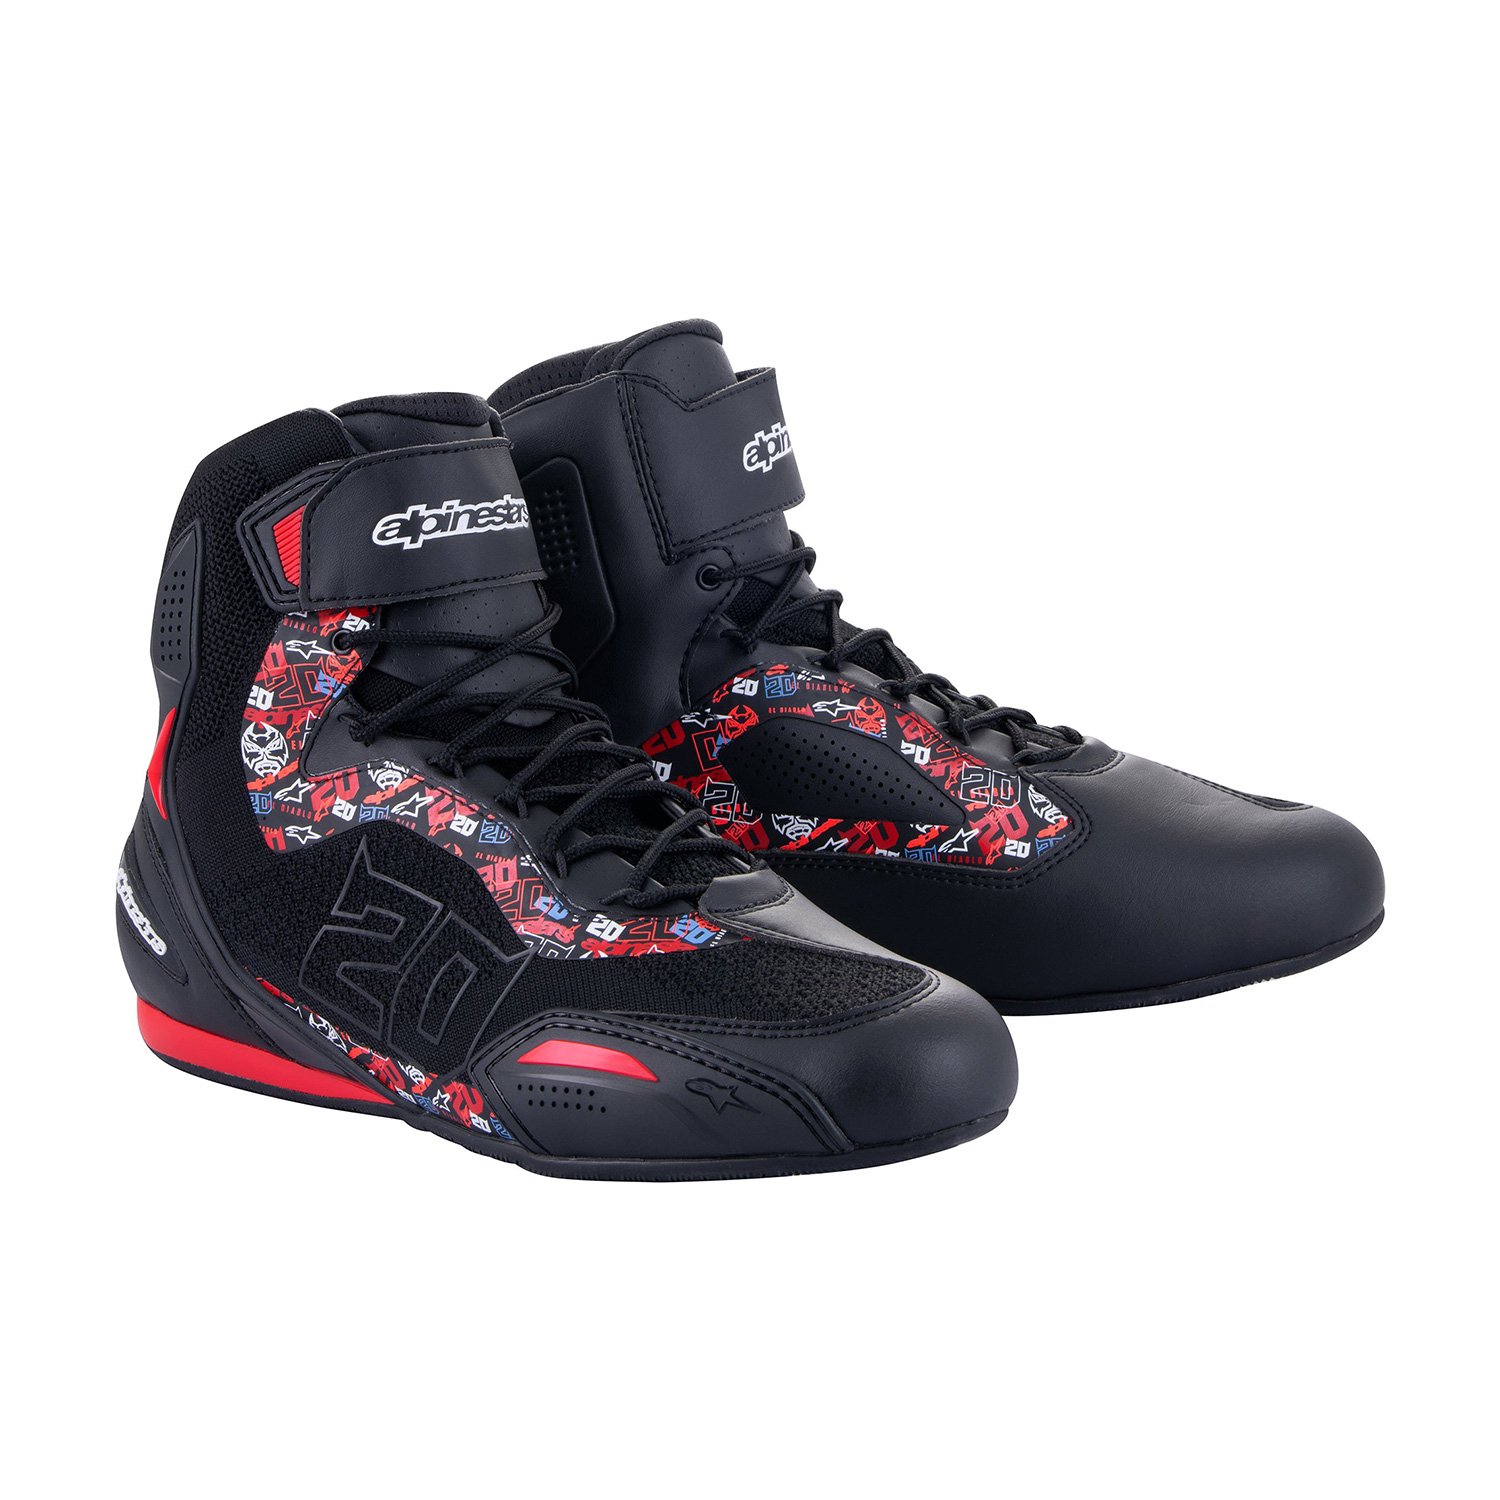 Image of Alpinestars FQ20 Faster-3 Rideknit Noir Bright Rouge Chaussures Taille US 65